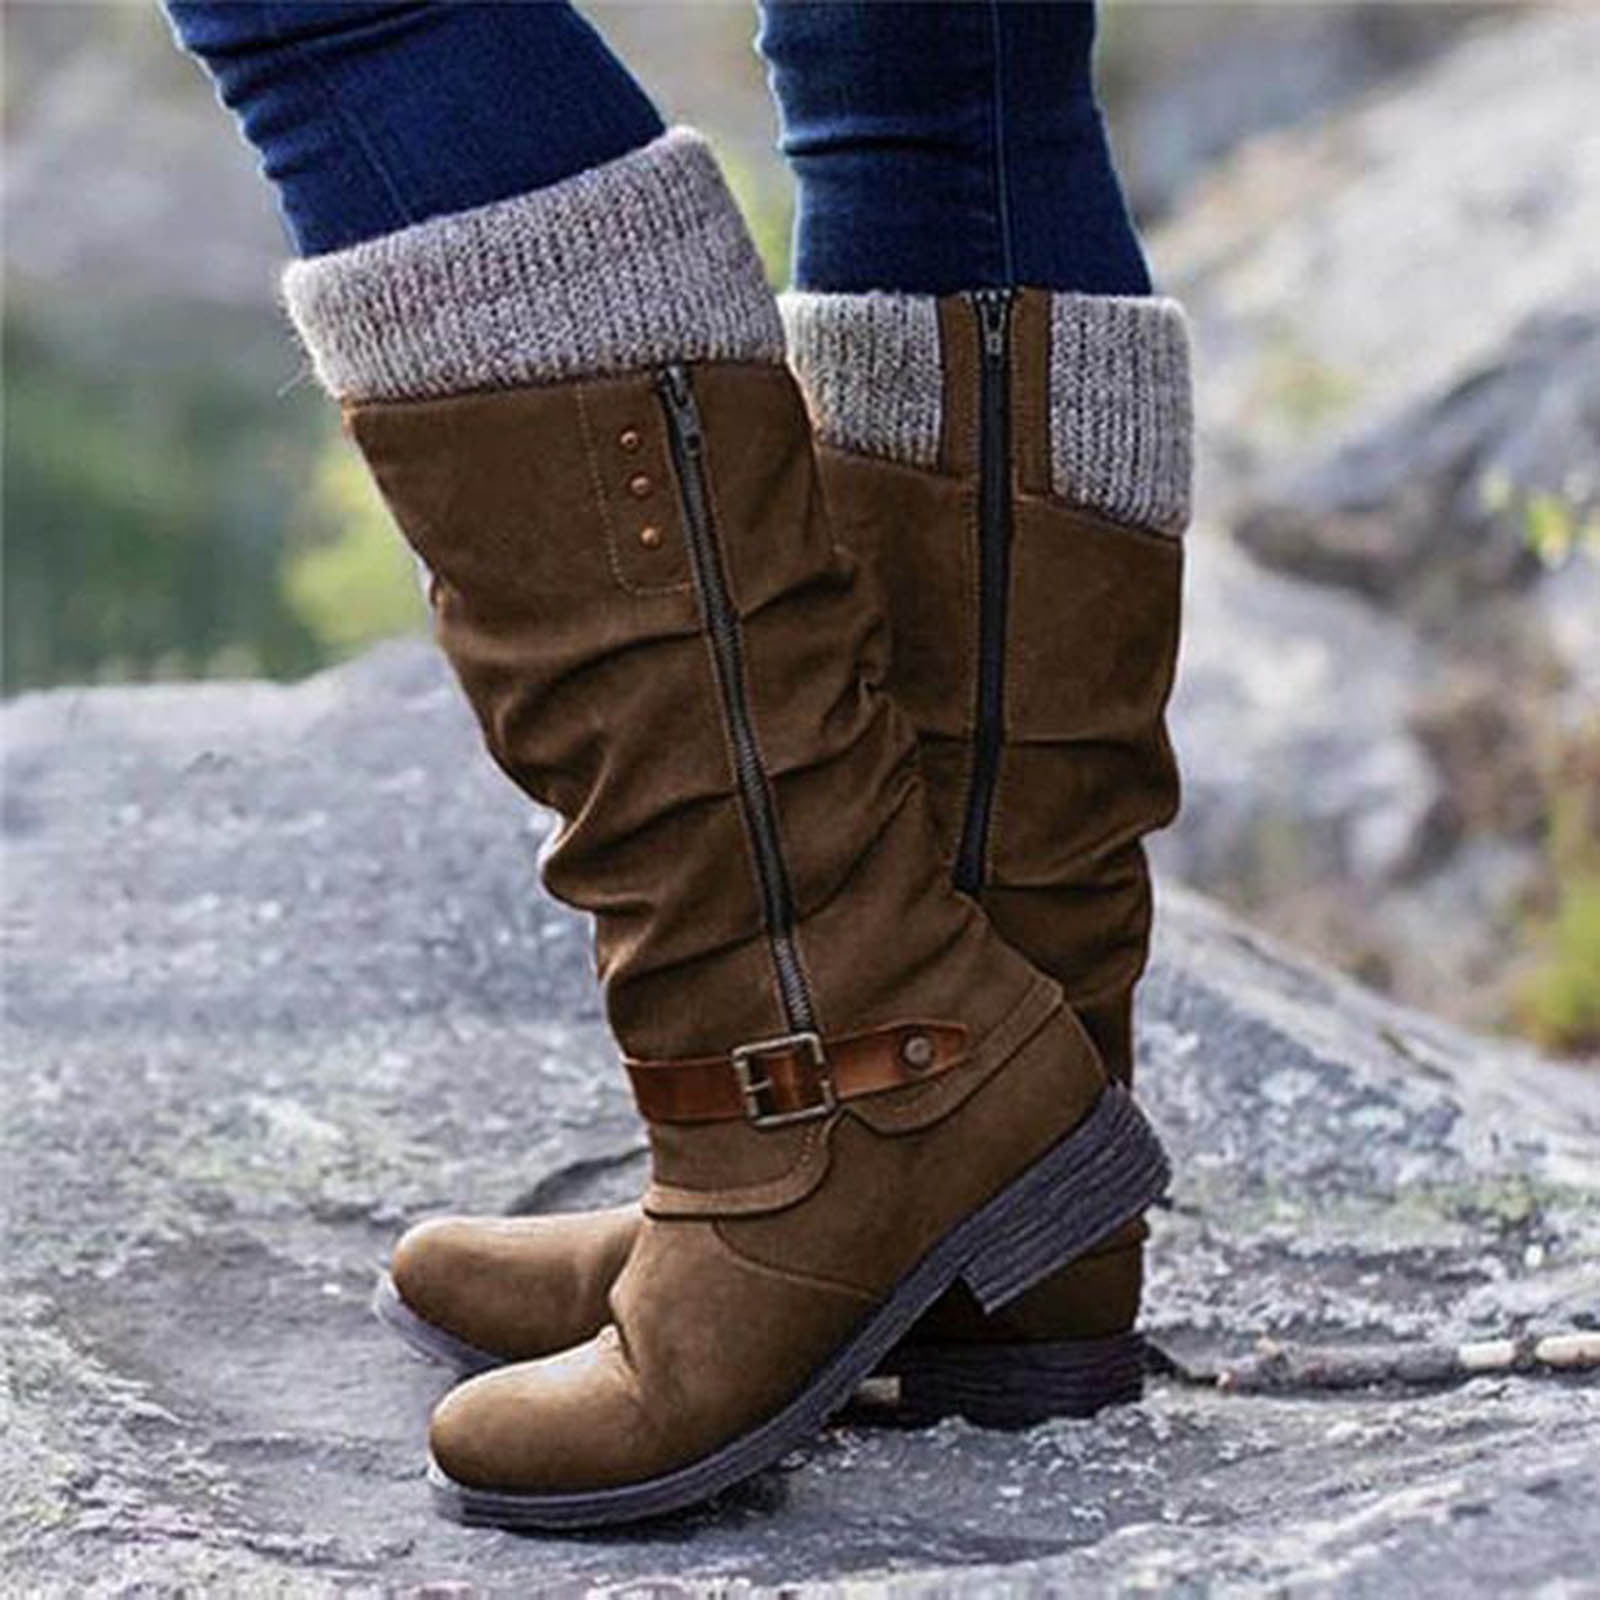 Women's Winter Snow Boots Over Knee High Boots Pull on Boots Warm Outdoor Shoes